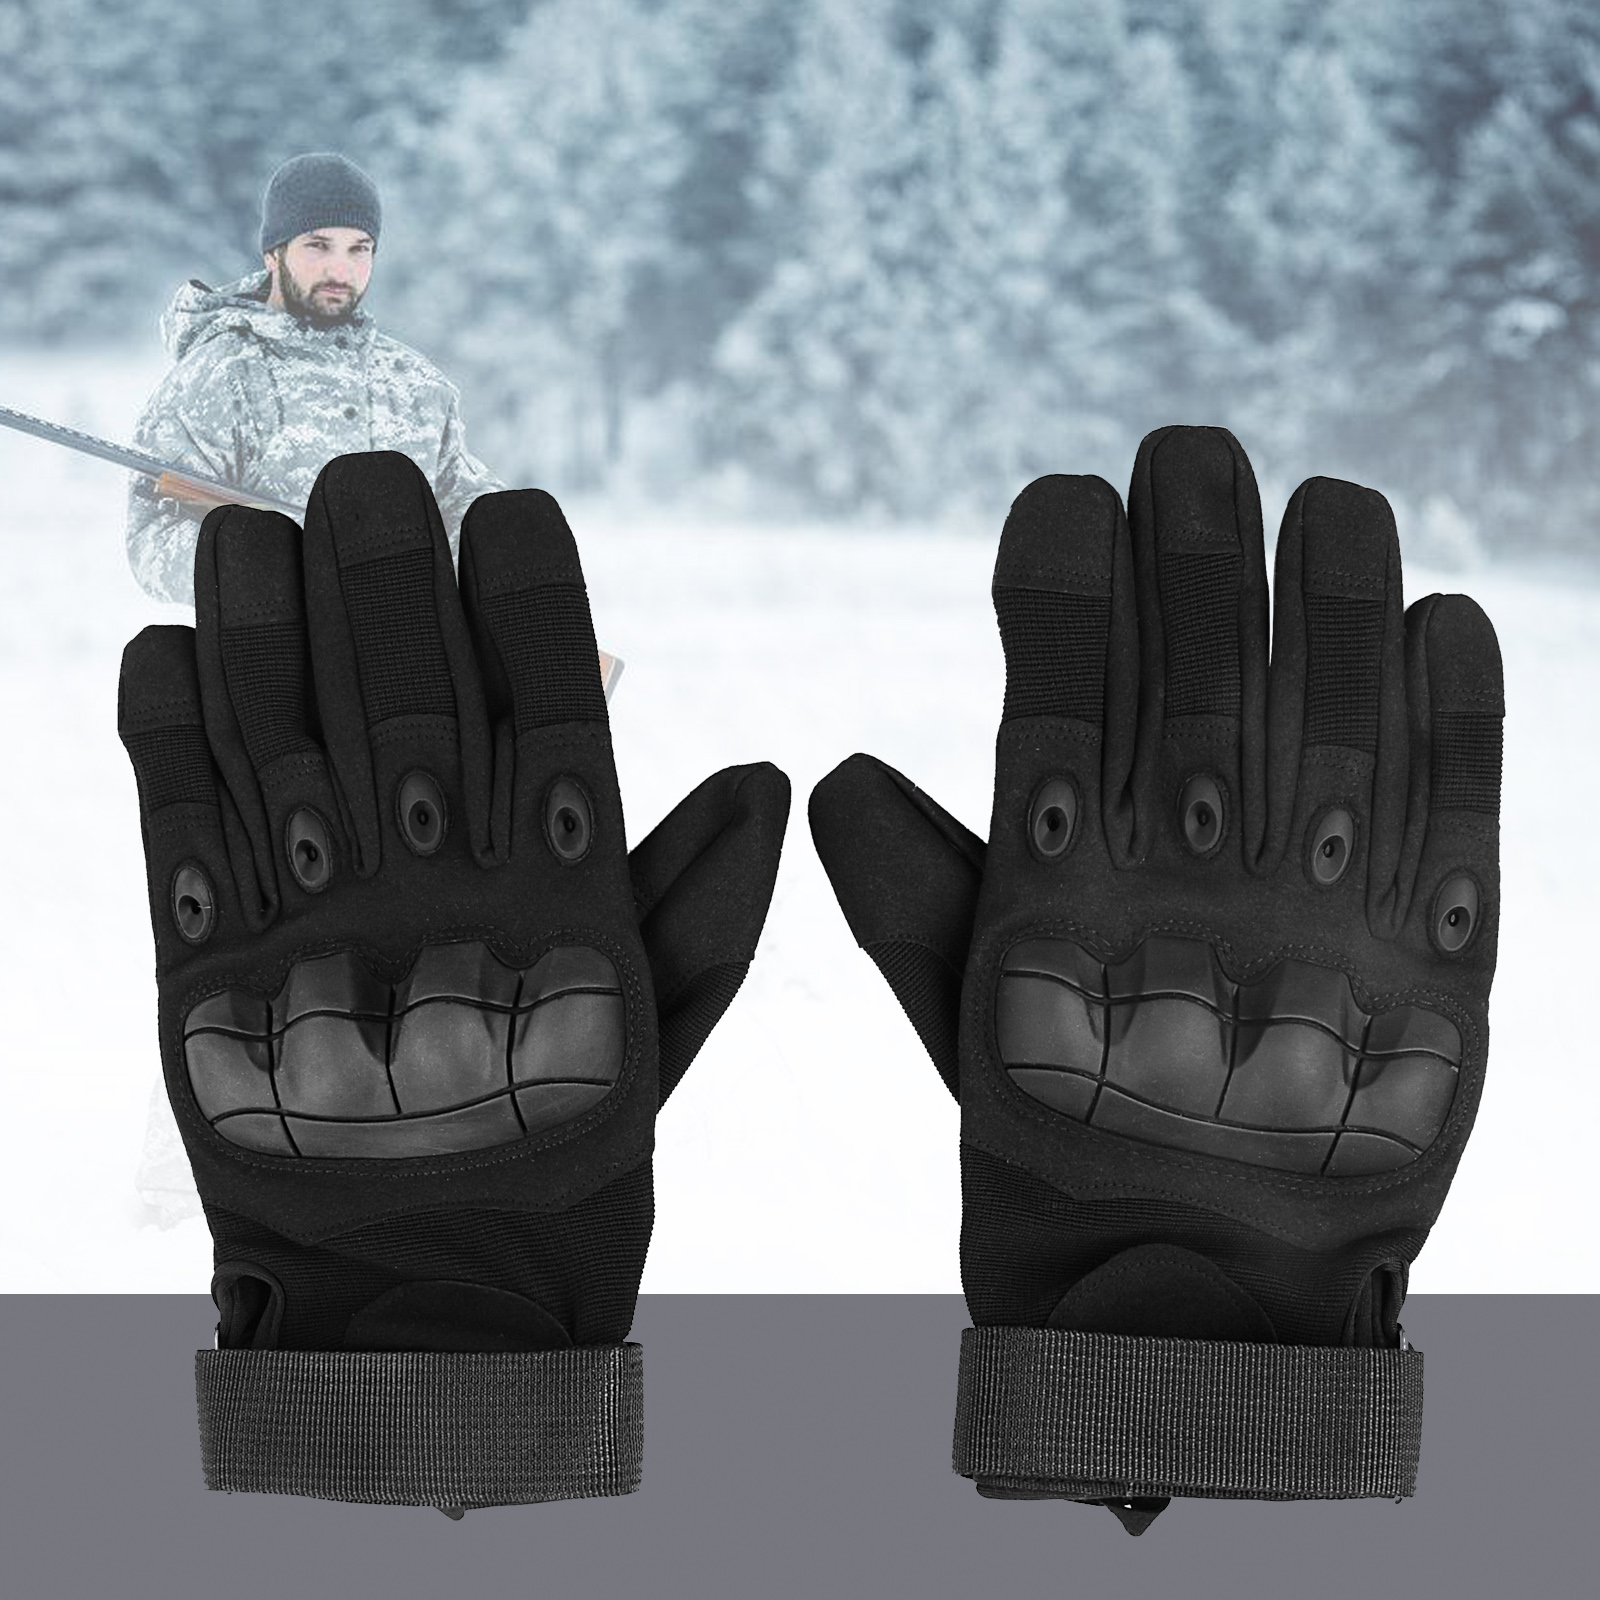 Pair Tactical Military Gloves Men Winter Autumn Army Full Finger ...